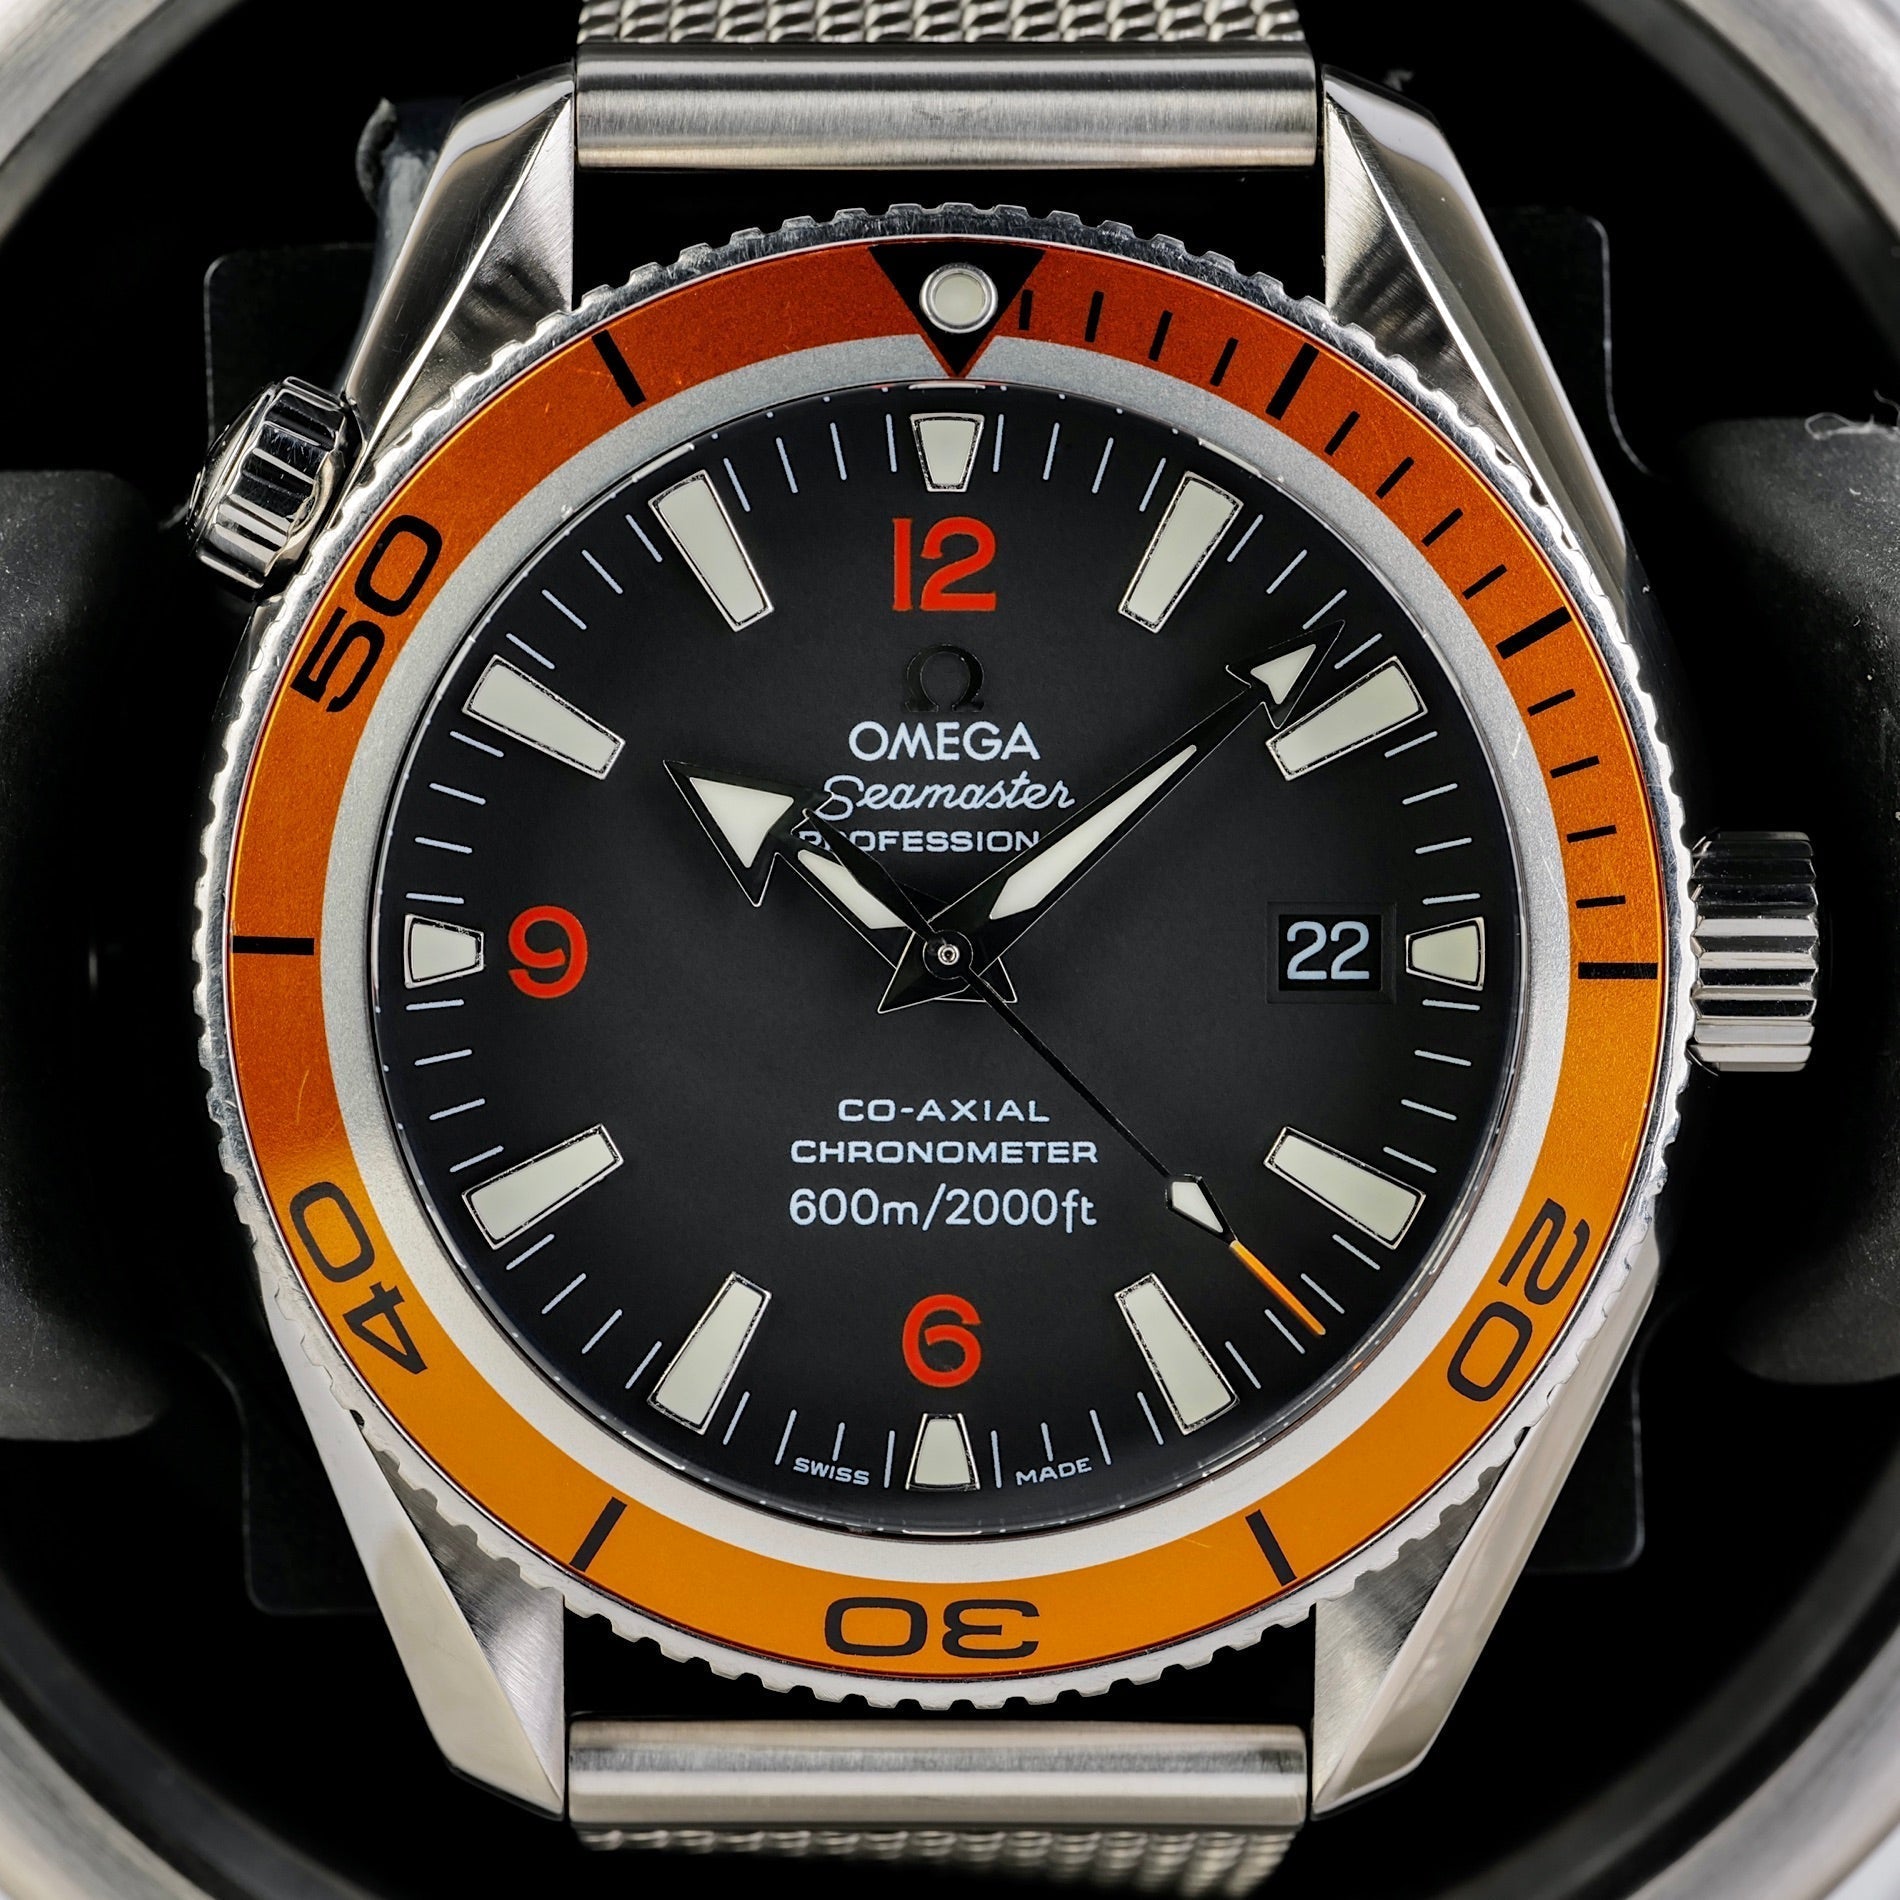 Omega Seamaster Professional Planet Ocean Co-Axial Chronometer Ref 